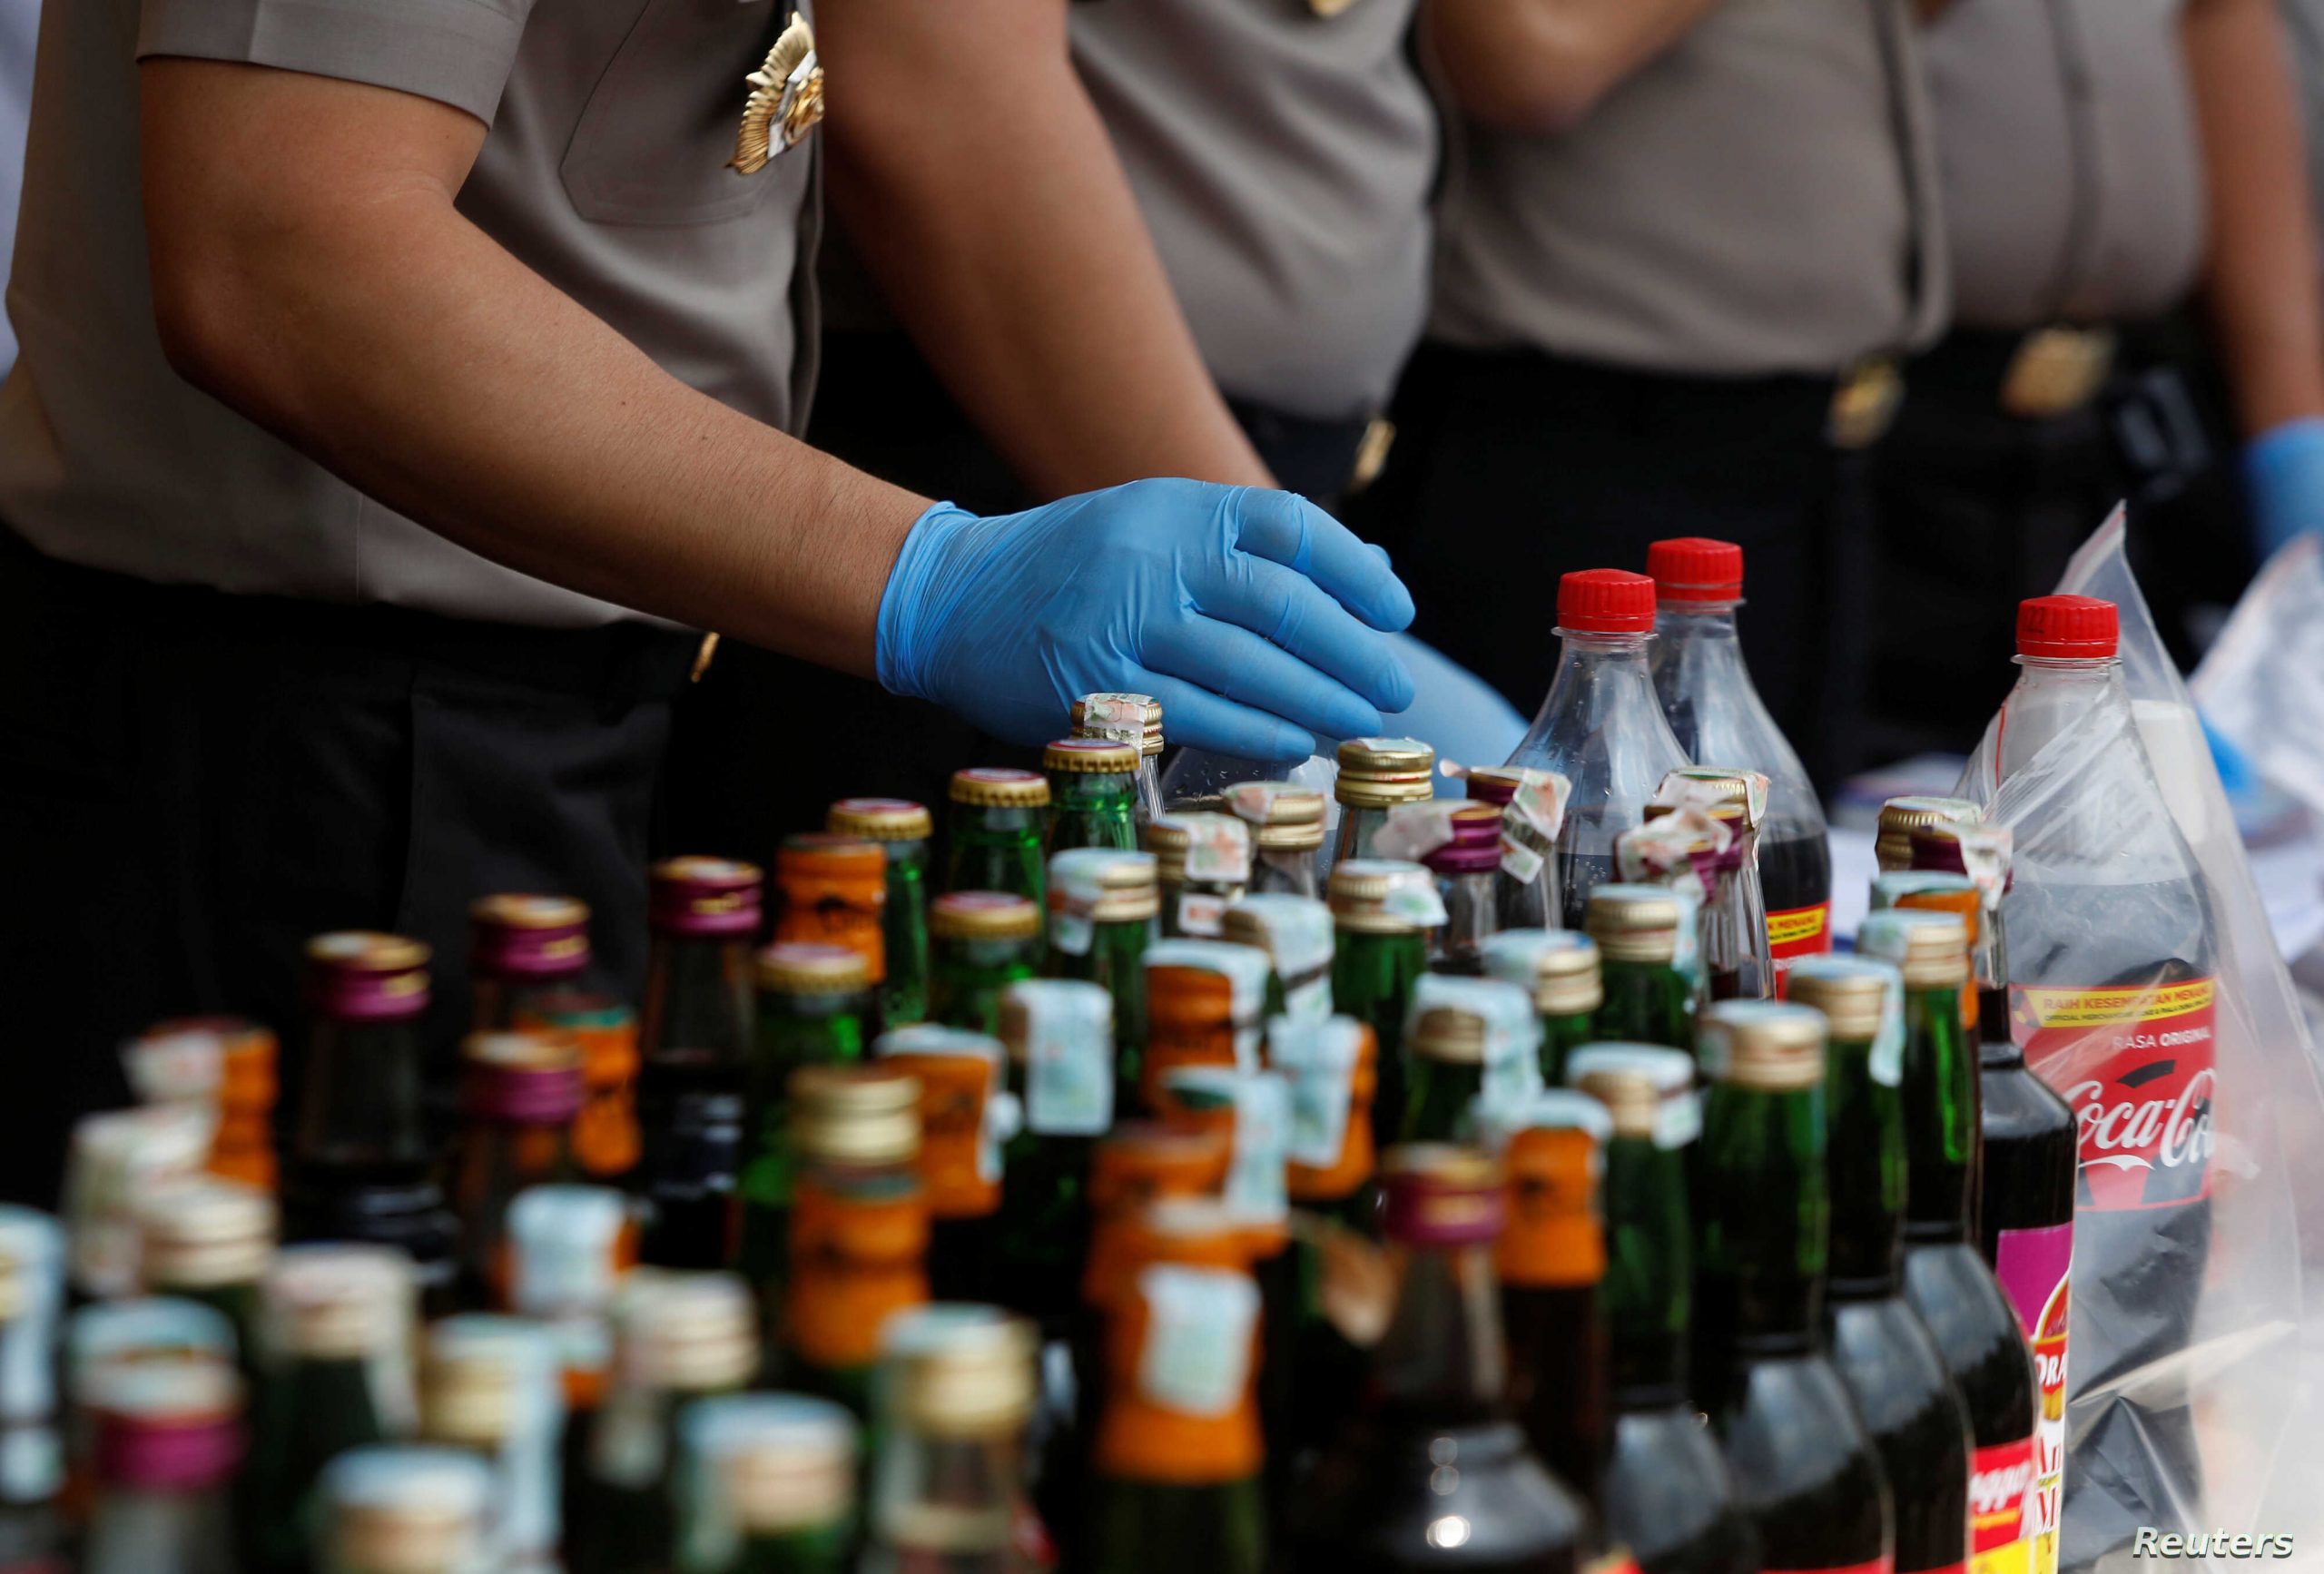 Police prepare evidence during a press conference regarding the arrests of suspects linked to the production and sale of illegal bootleg alcohol which claimed the lives of more than 80 people this week in Jakarta